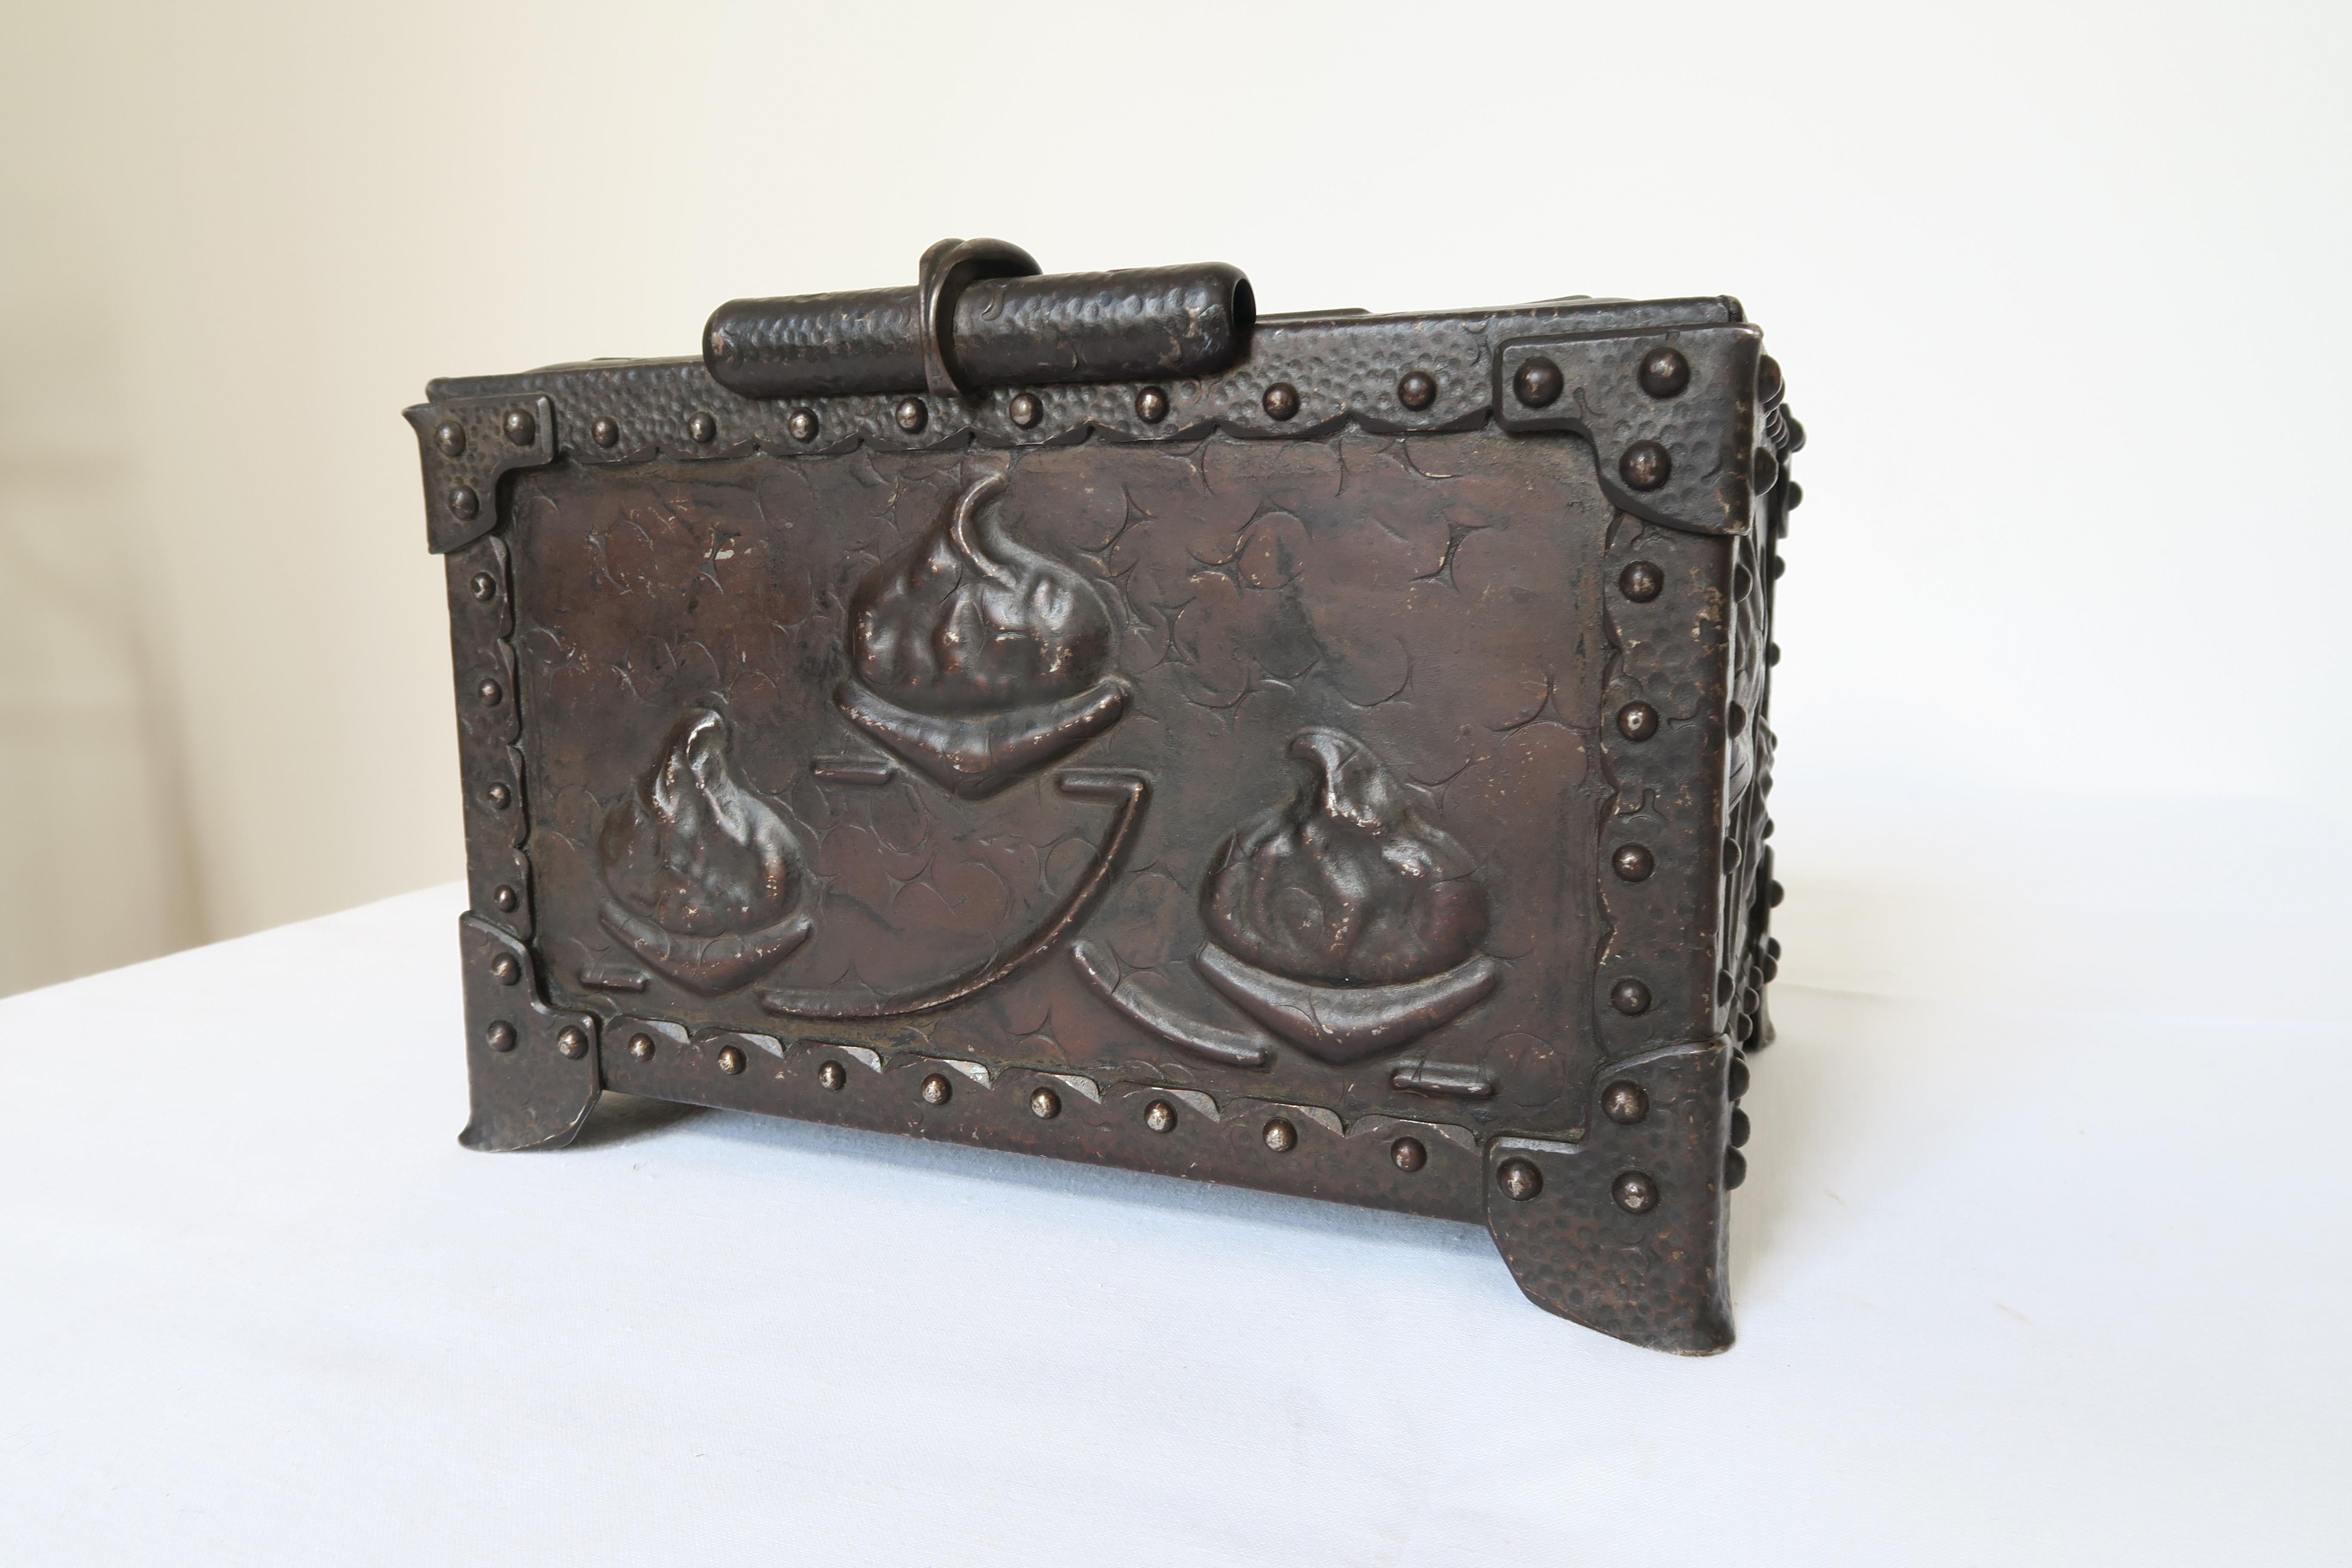 The item on sale is an iron chest or casket suitable for arts and crafts or as a decorative object. It might have been made in Germany, England or Scottland. The box has been hand crafted and embossed with ornaments resemblant of acorns or